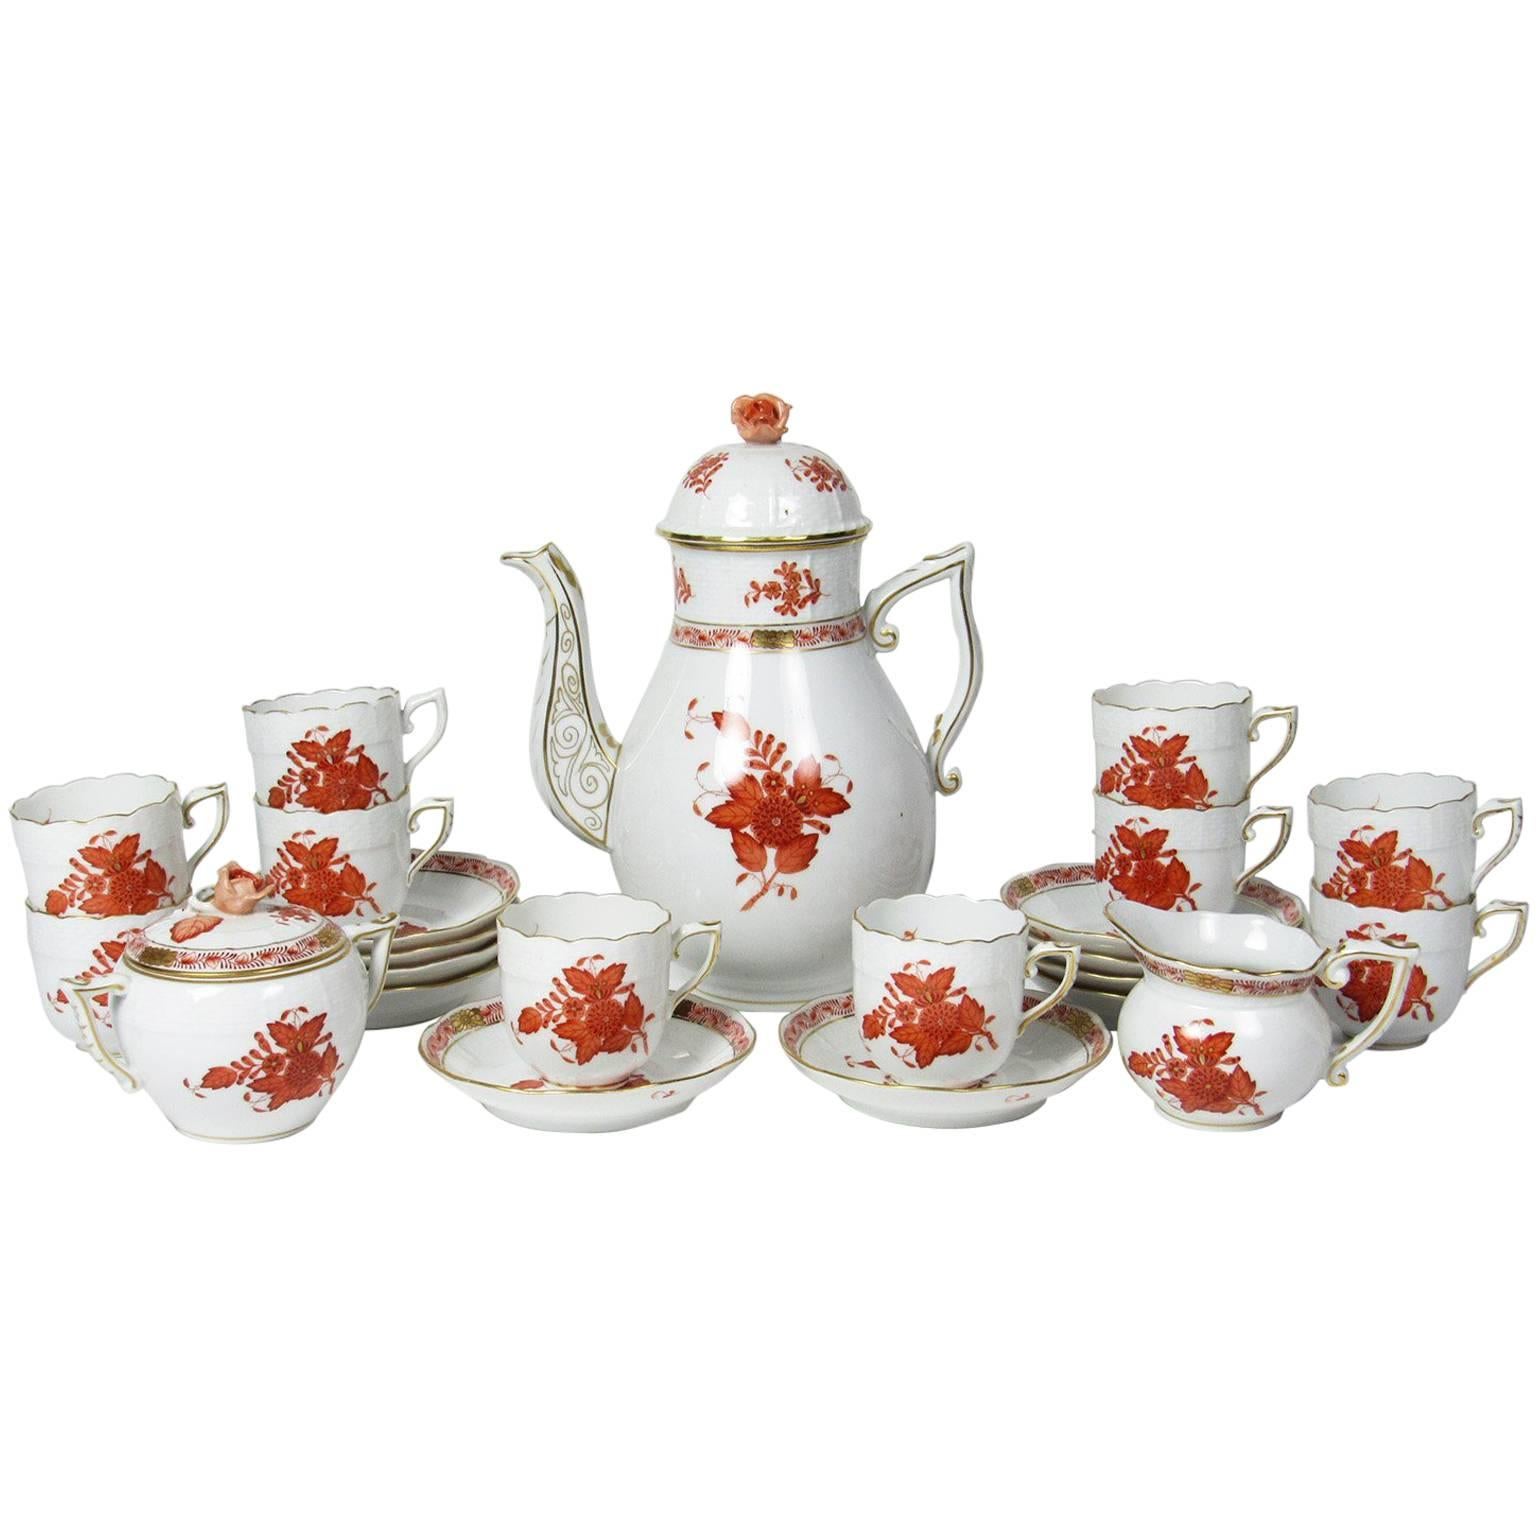 Herend 'Chinese Bouquet' Porcelain Demitasse Service for Ten